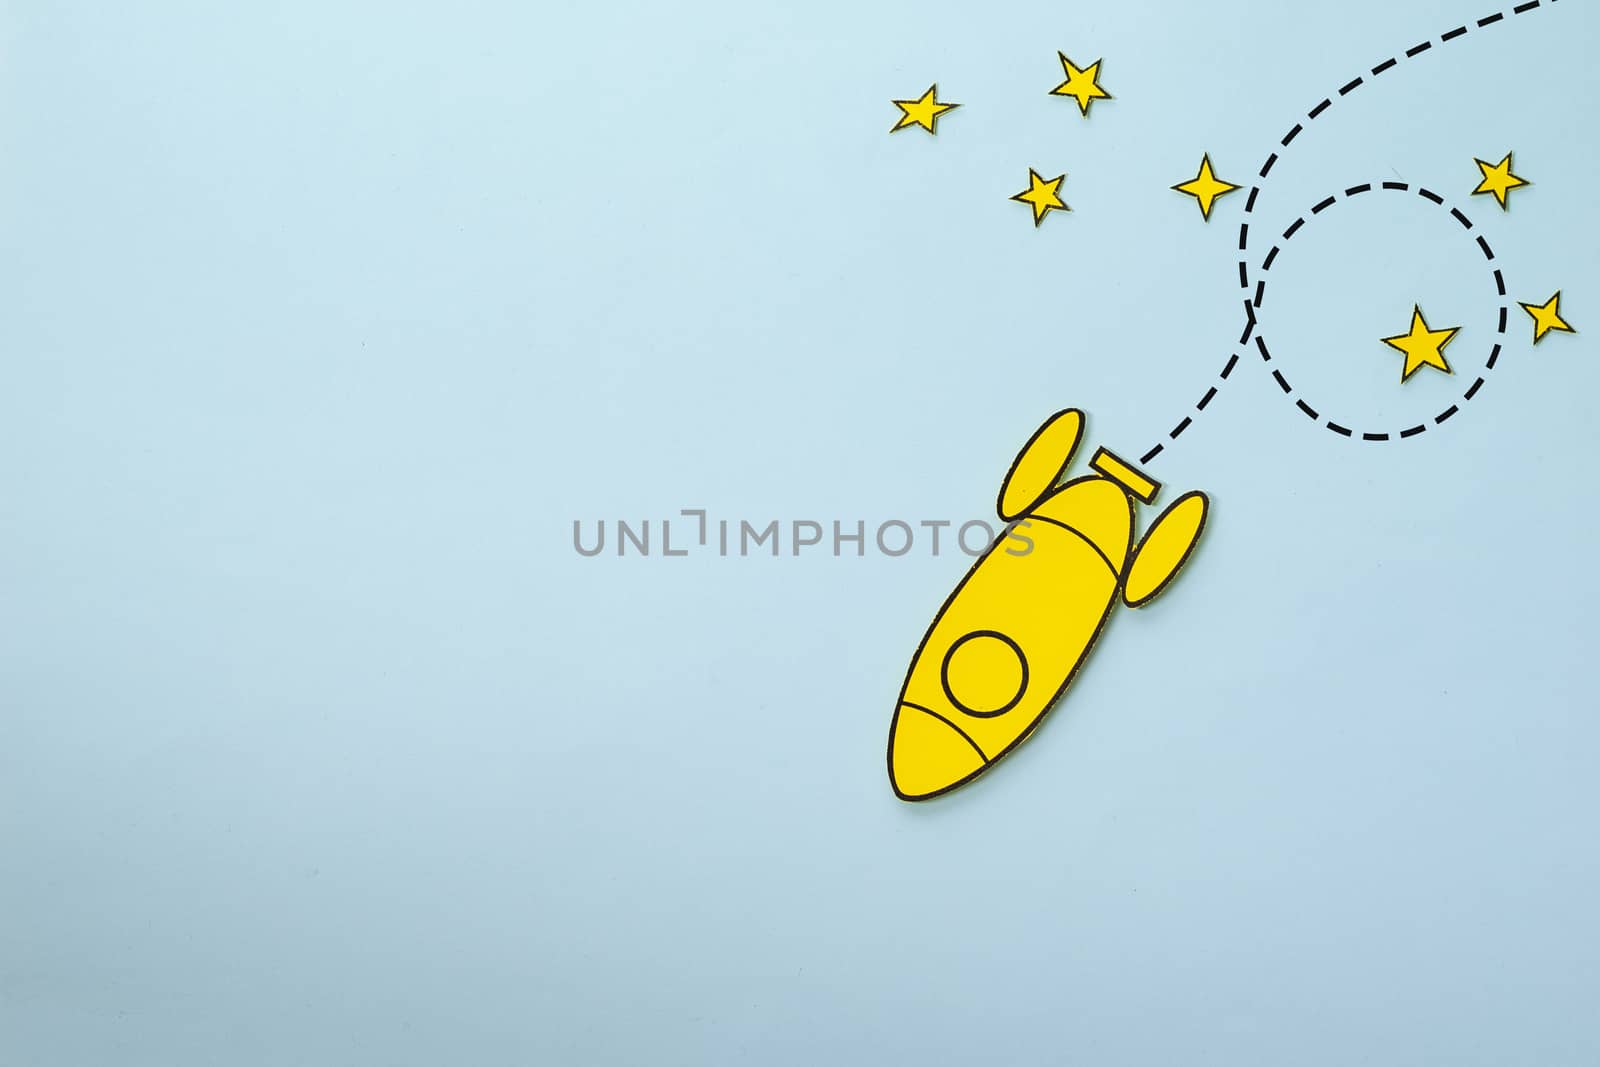 Little yellow rocket looping around stars on its way back to earth over a blue background with copy space